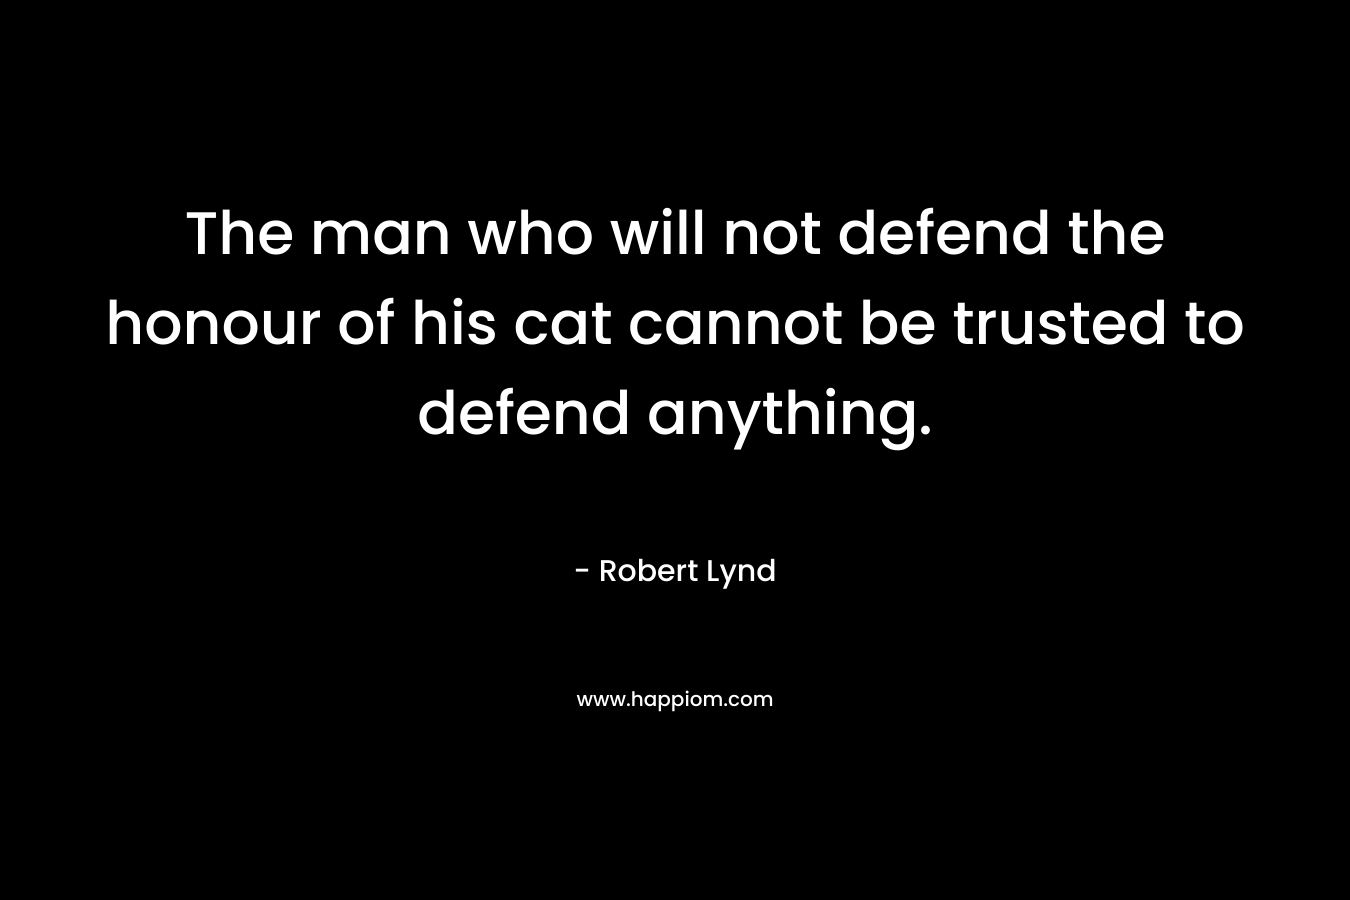 The man who will not defend the honour of his cat cannot be trusted to defend anything.